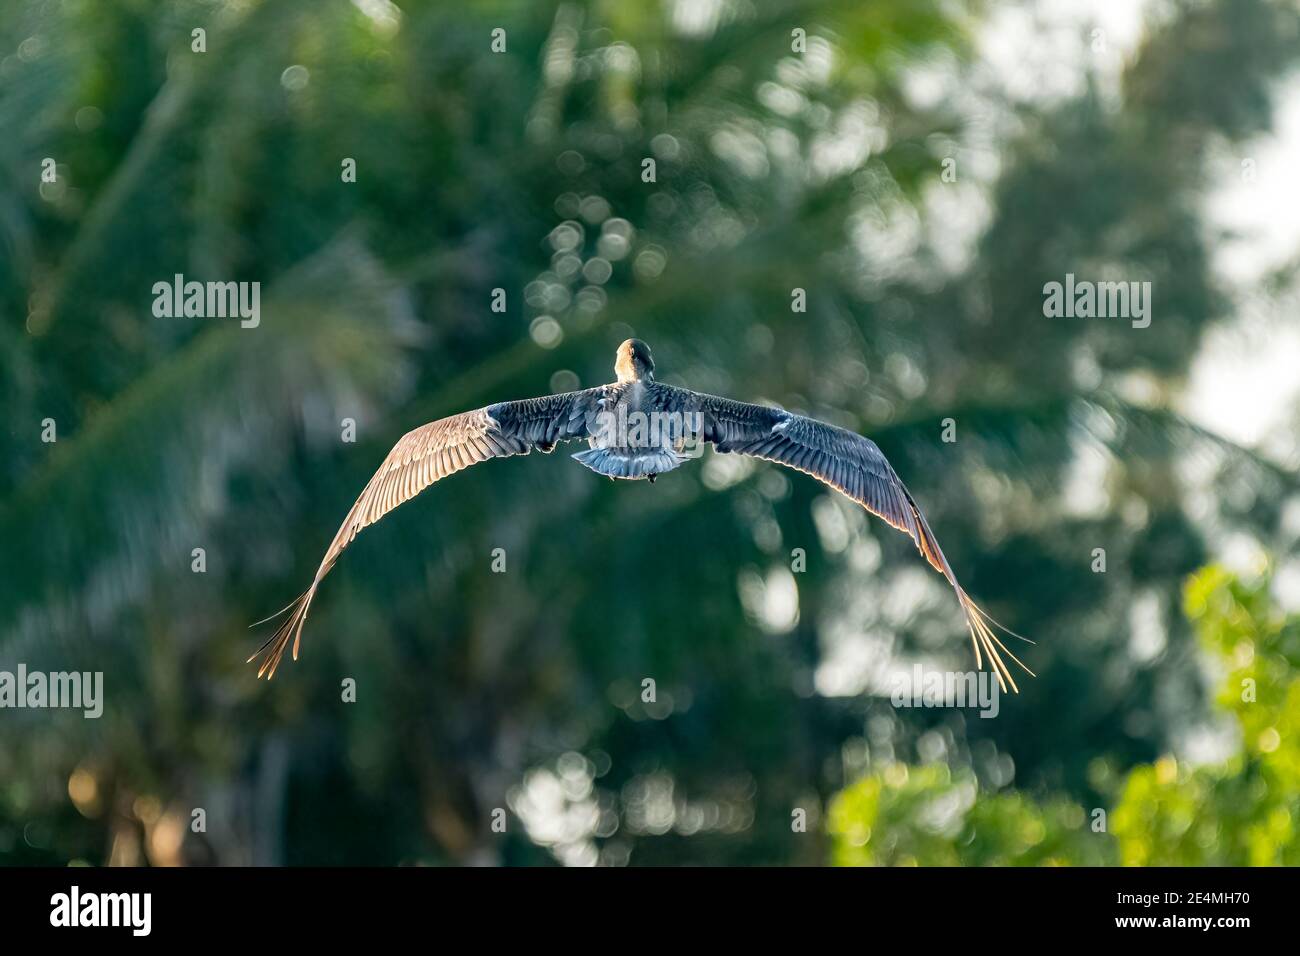 A Brown pelican (Pelecanus occidentalis) flying away against a green palm tree background. Stock Photo